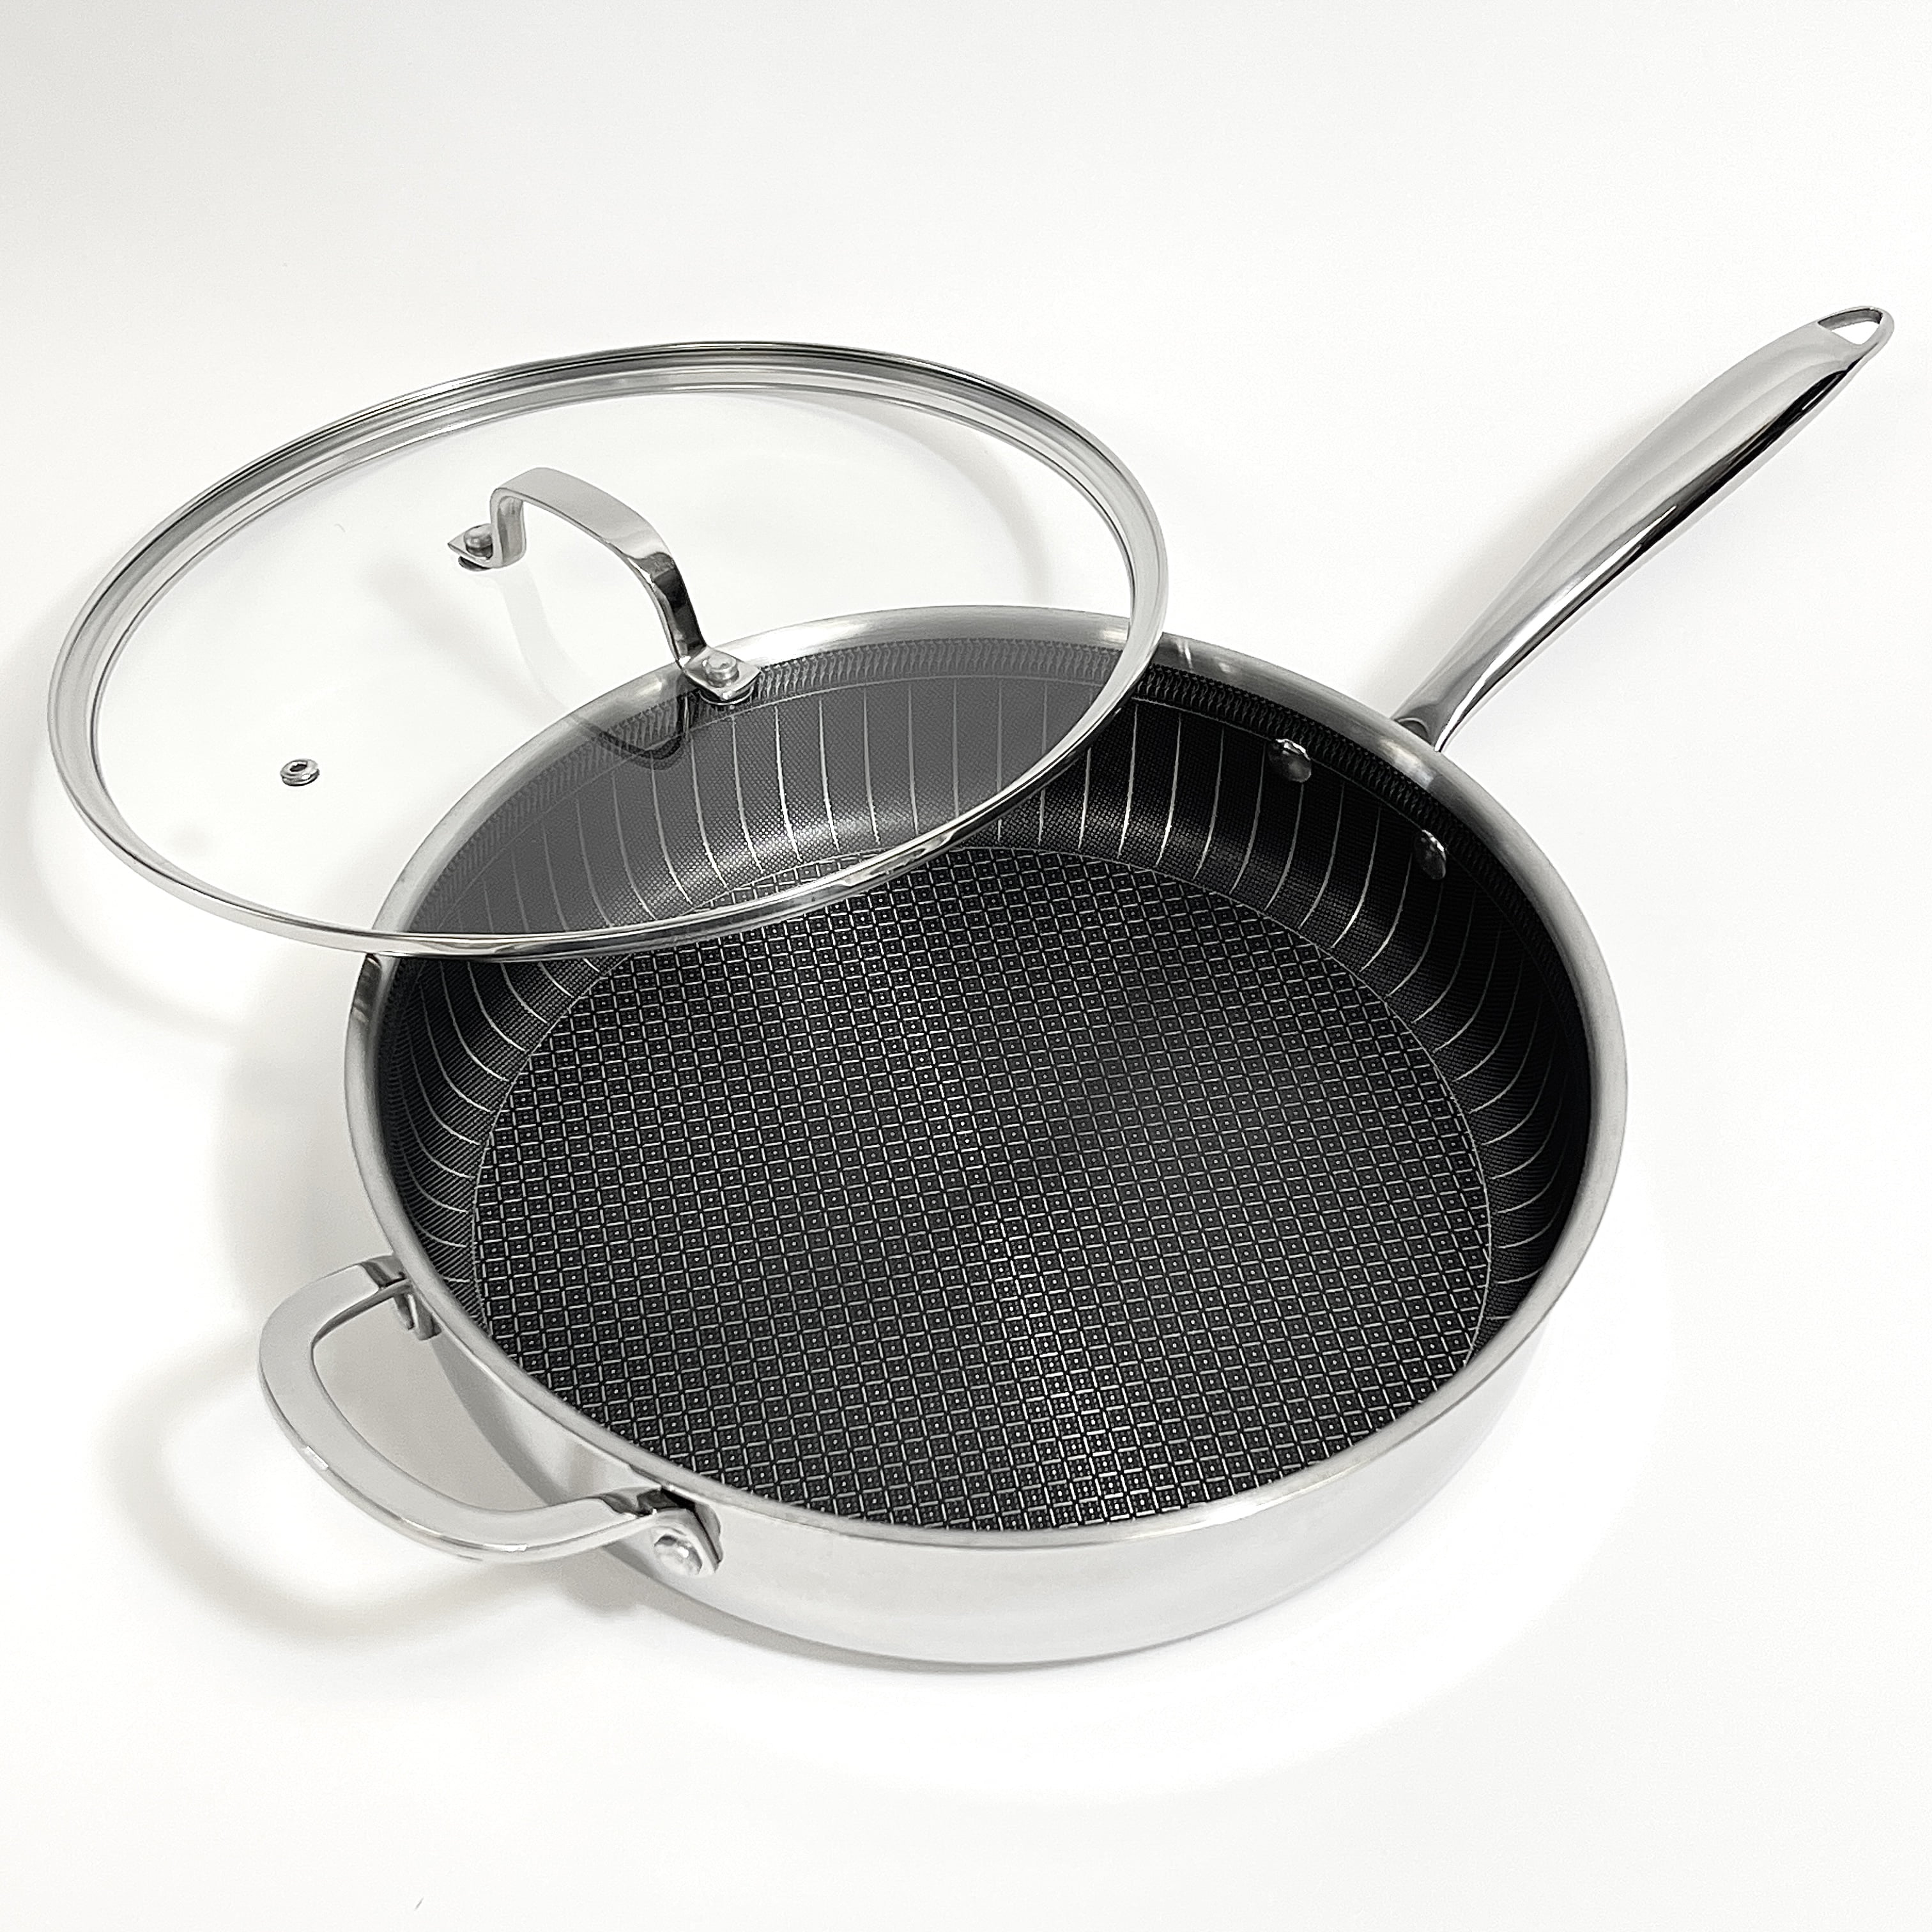 Lexi Home Tri-Ply Stainless Steel Nonstick Frying Pan Size: 12 LB5574